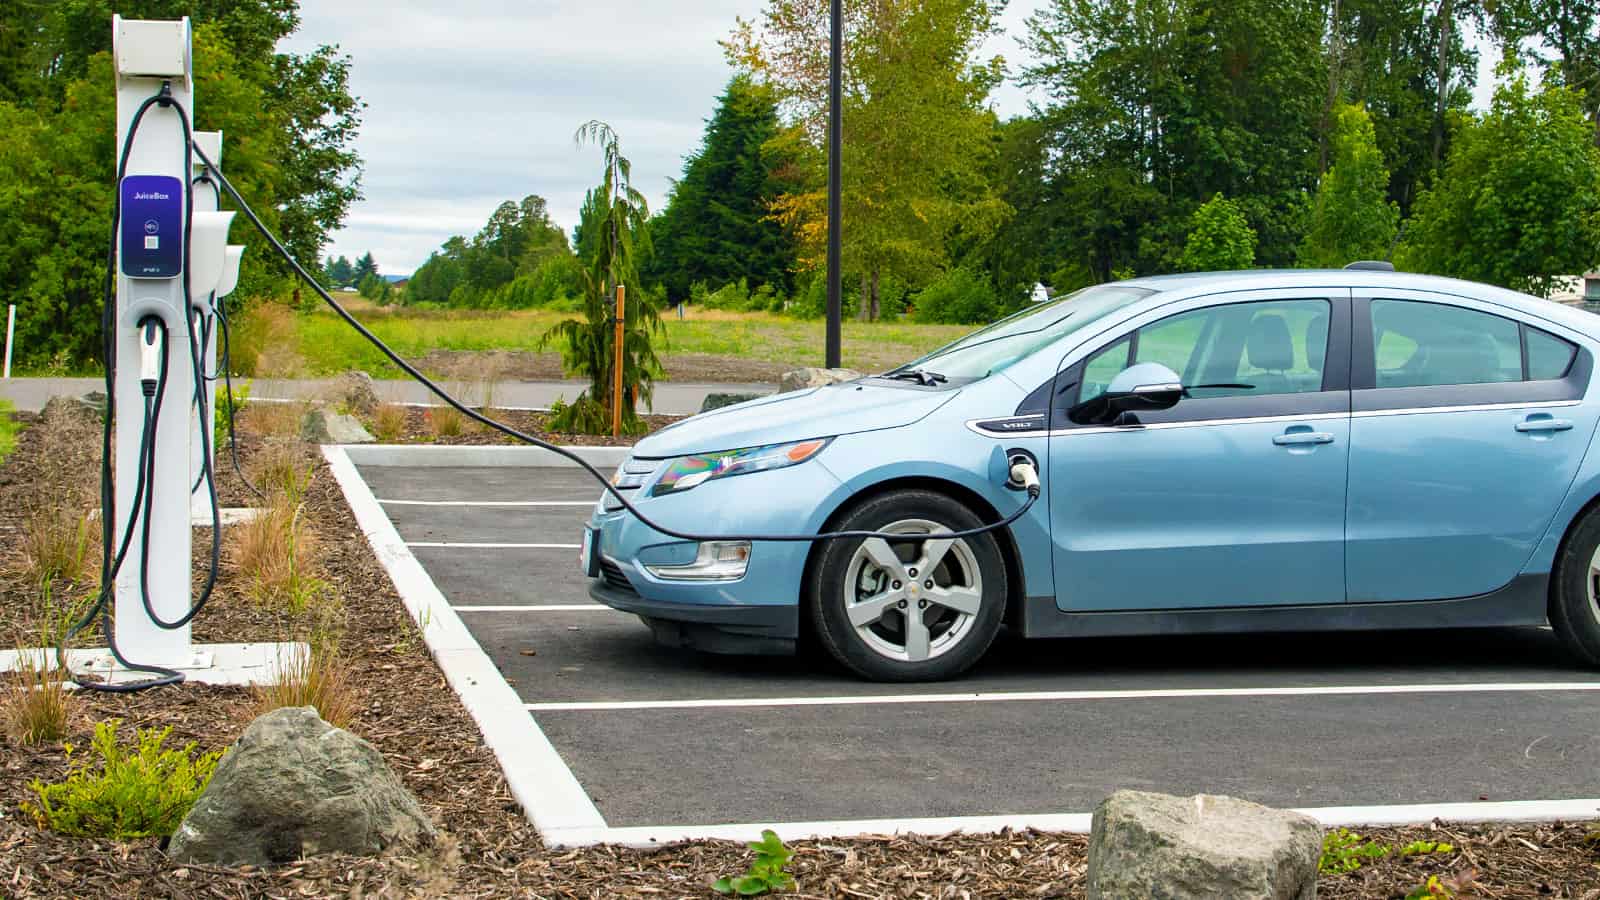 Blue Chevrolet Volt easily charging in a parking lot challenges the myth that electric vehicles are not convenient to charge